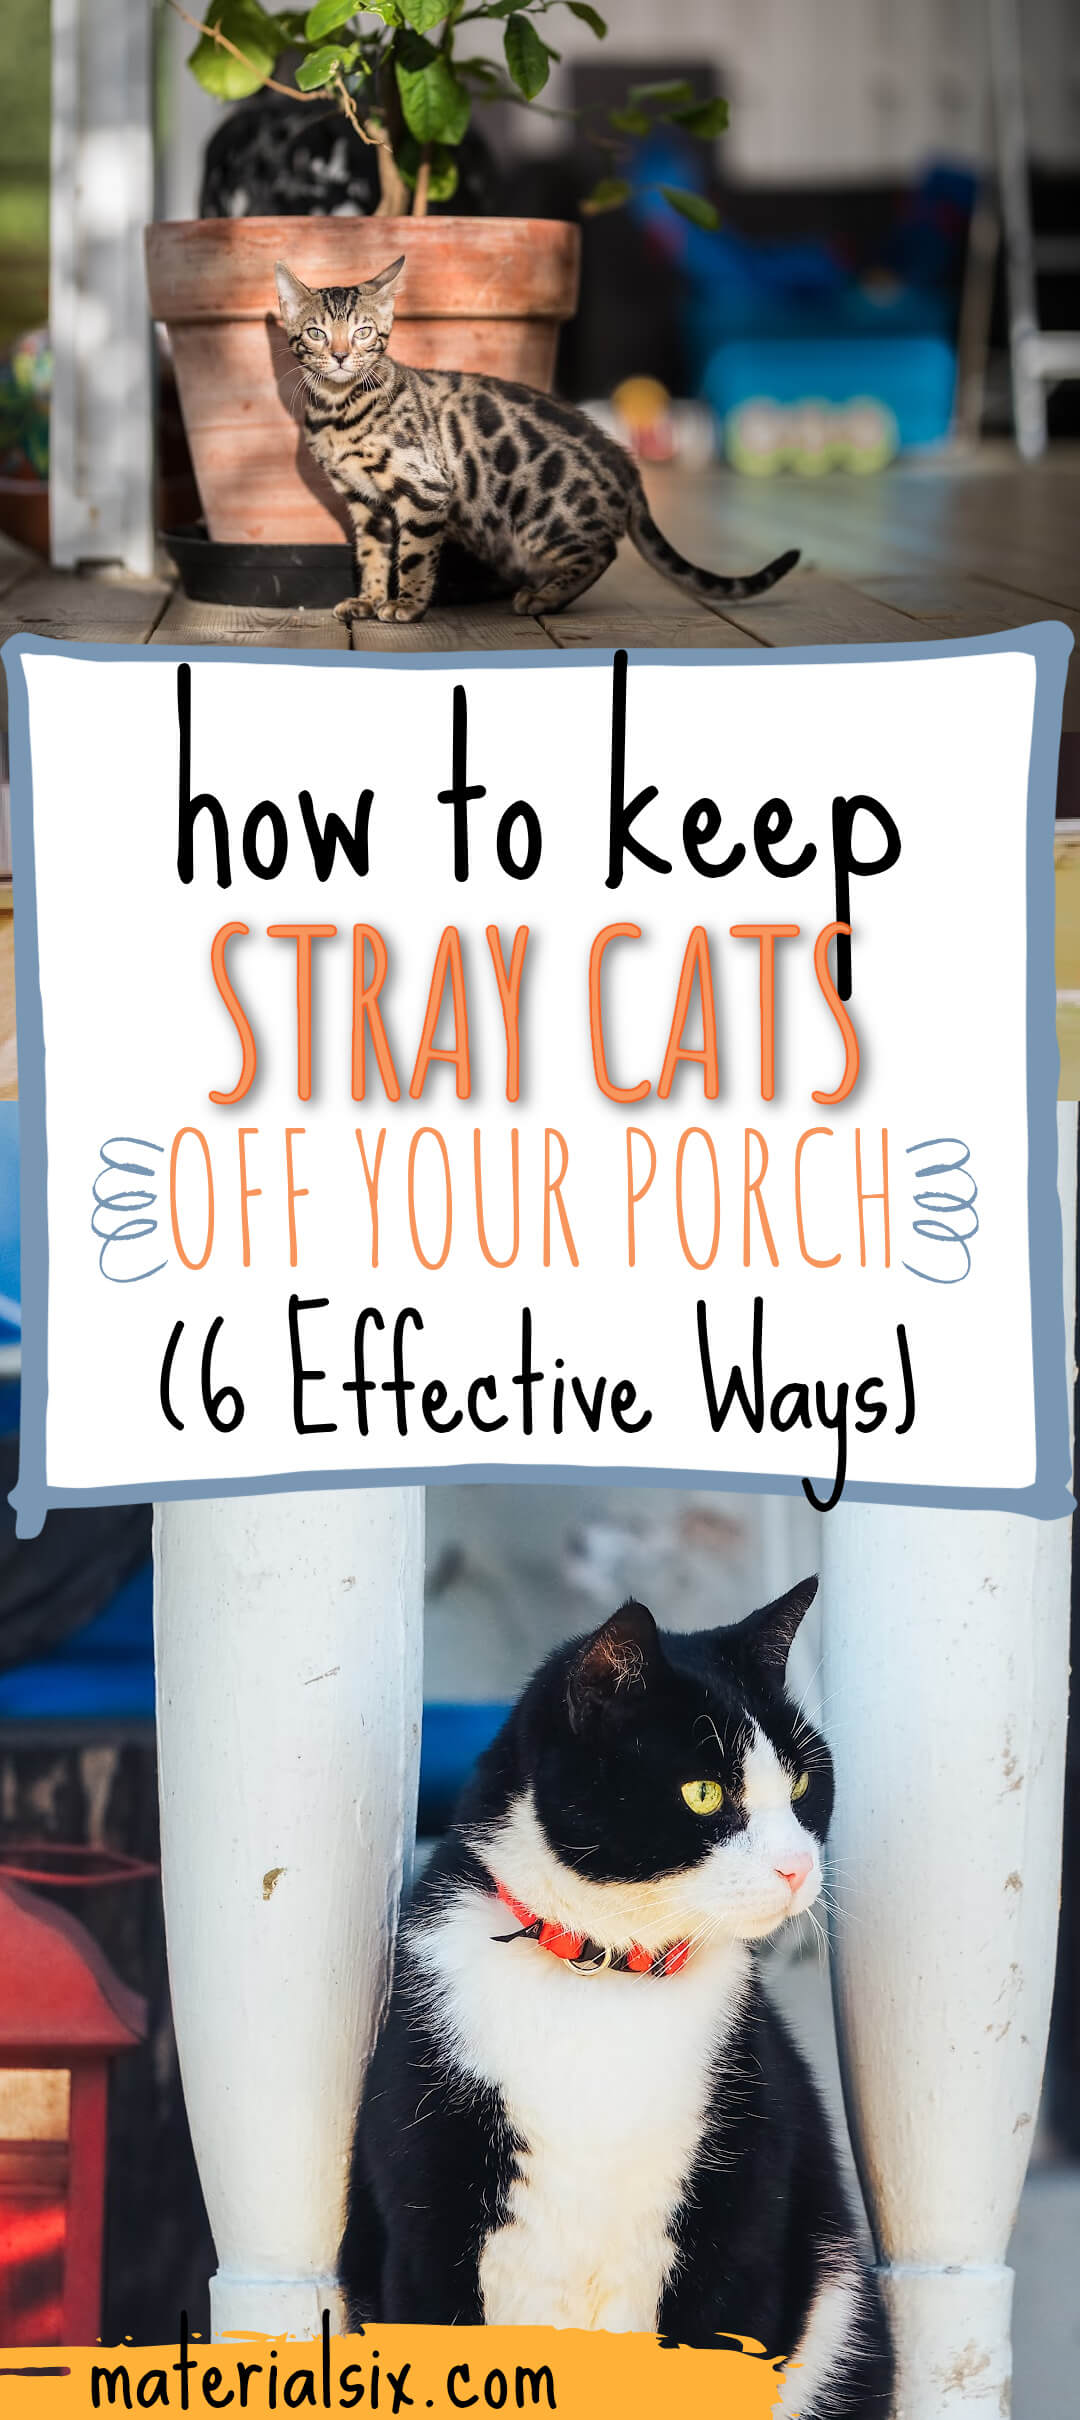 How To Keep Stray Cats Off Your Porch (3) (1)